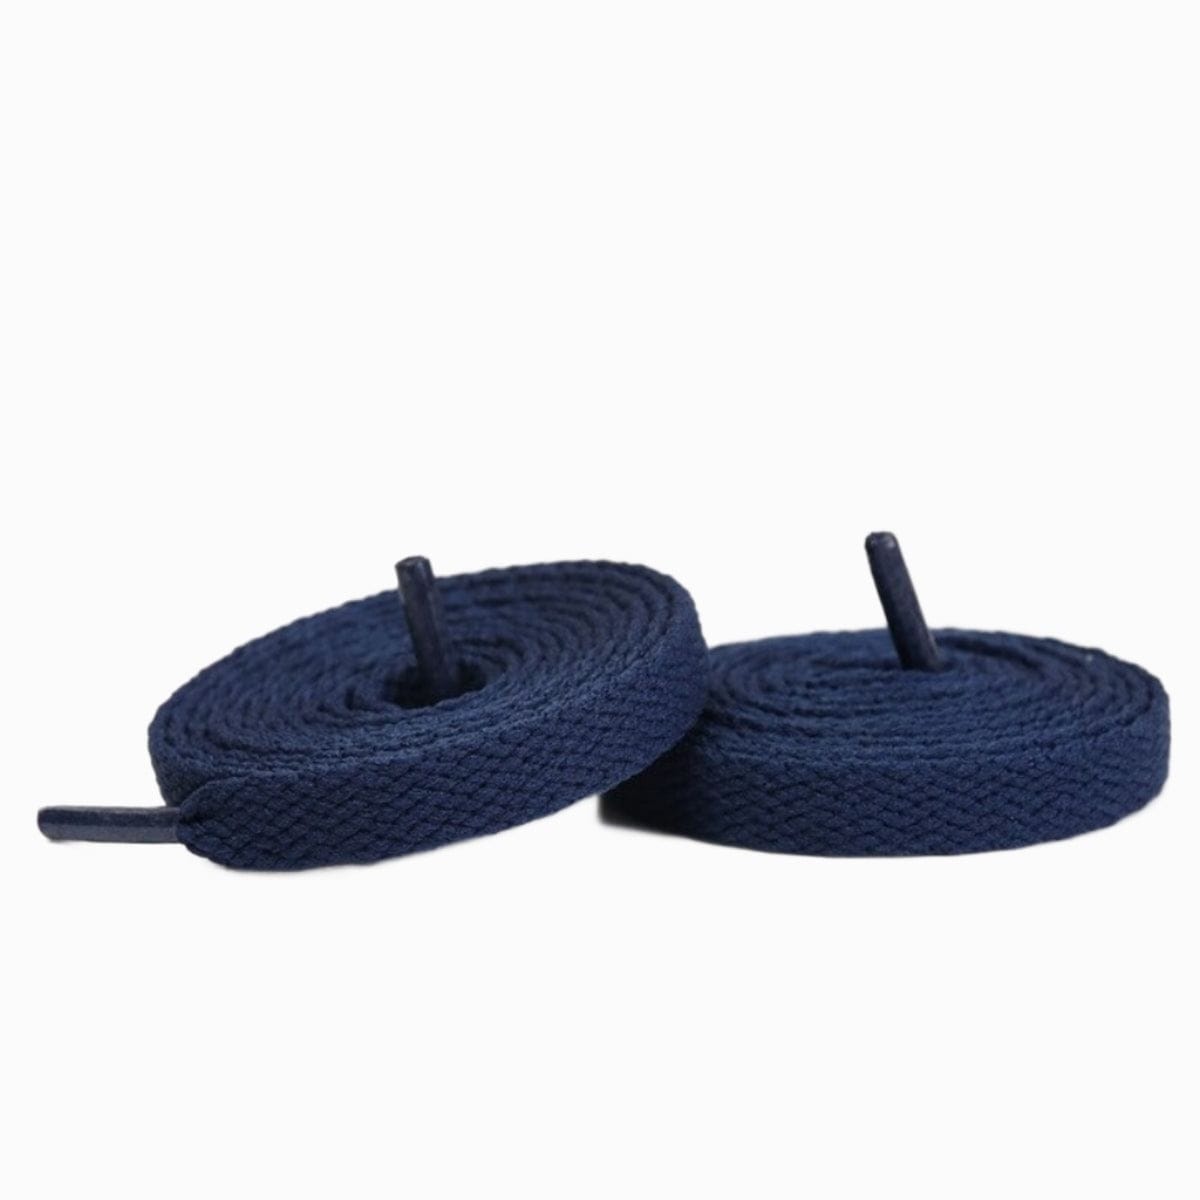 Dark Blue Replacement Shoe Laces for Adidas Handball Spezial Sneakers by Kicks Shoelaces